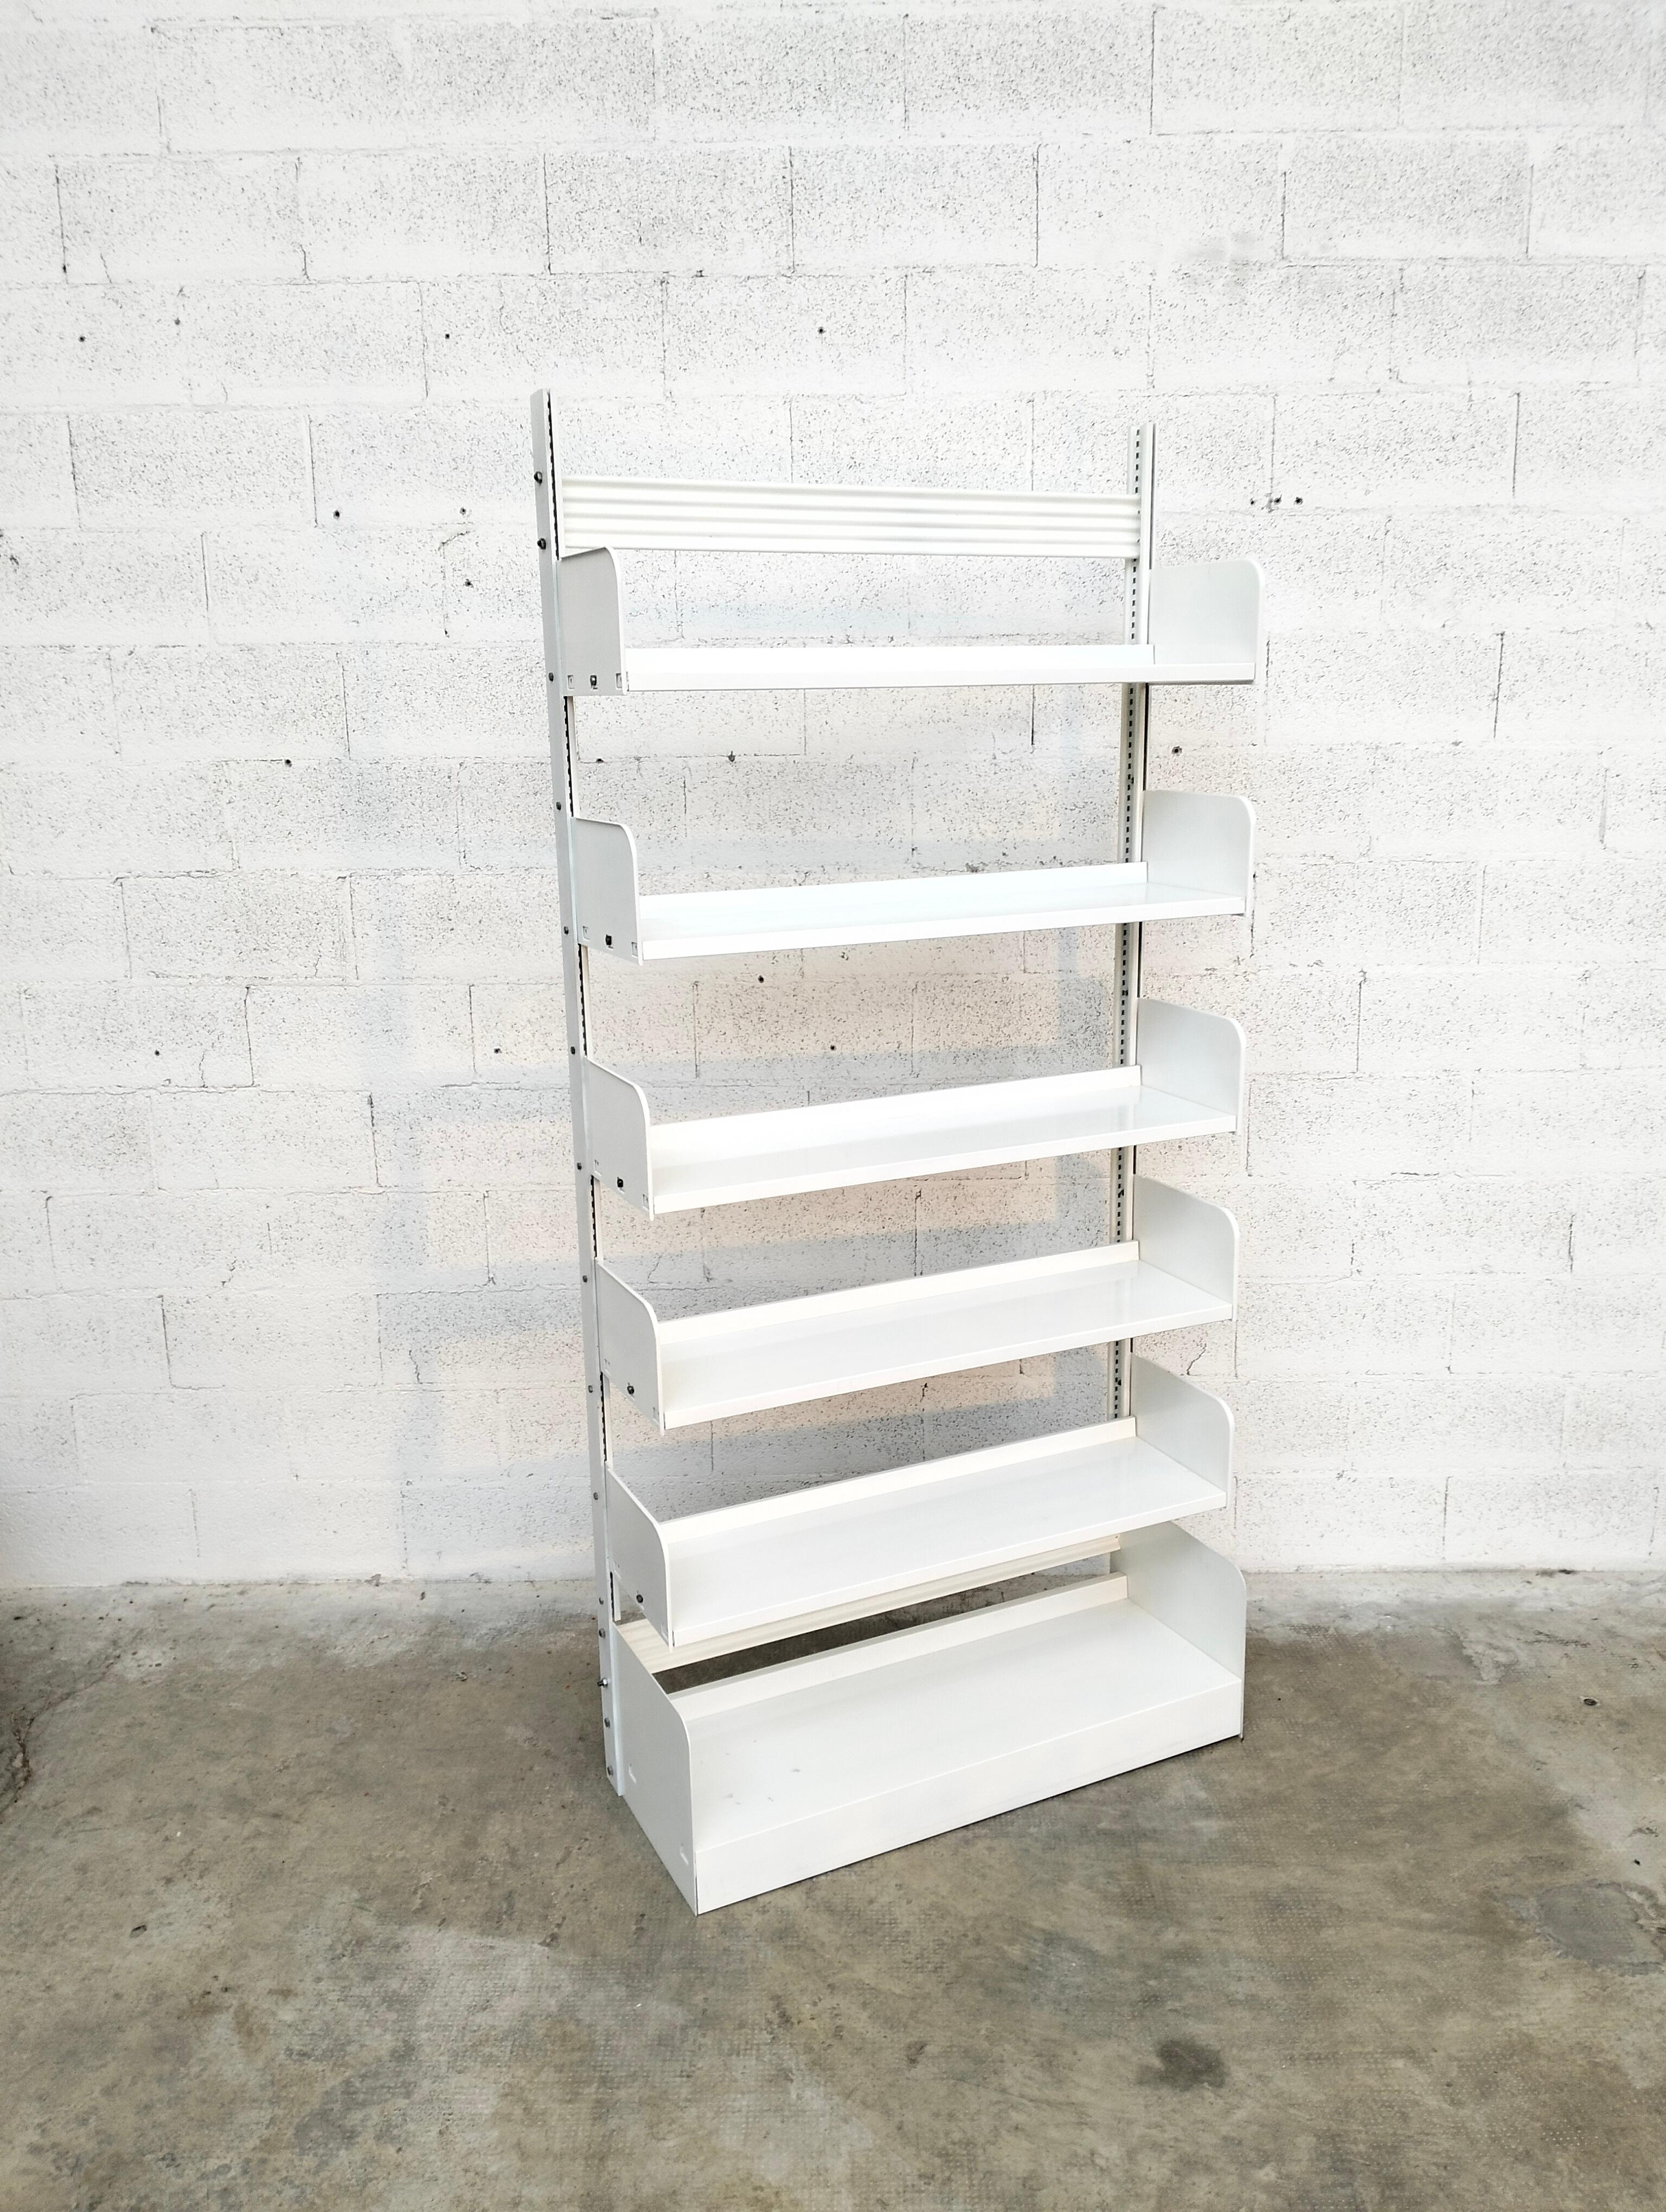 The 'Congress' shelf is a modest and strong bookcase made out of steel sheets.
The model is freestanding making this a versatile piece. 
The metal sheets bend upwards at the end of the shelf making them function as book ends. The library was